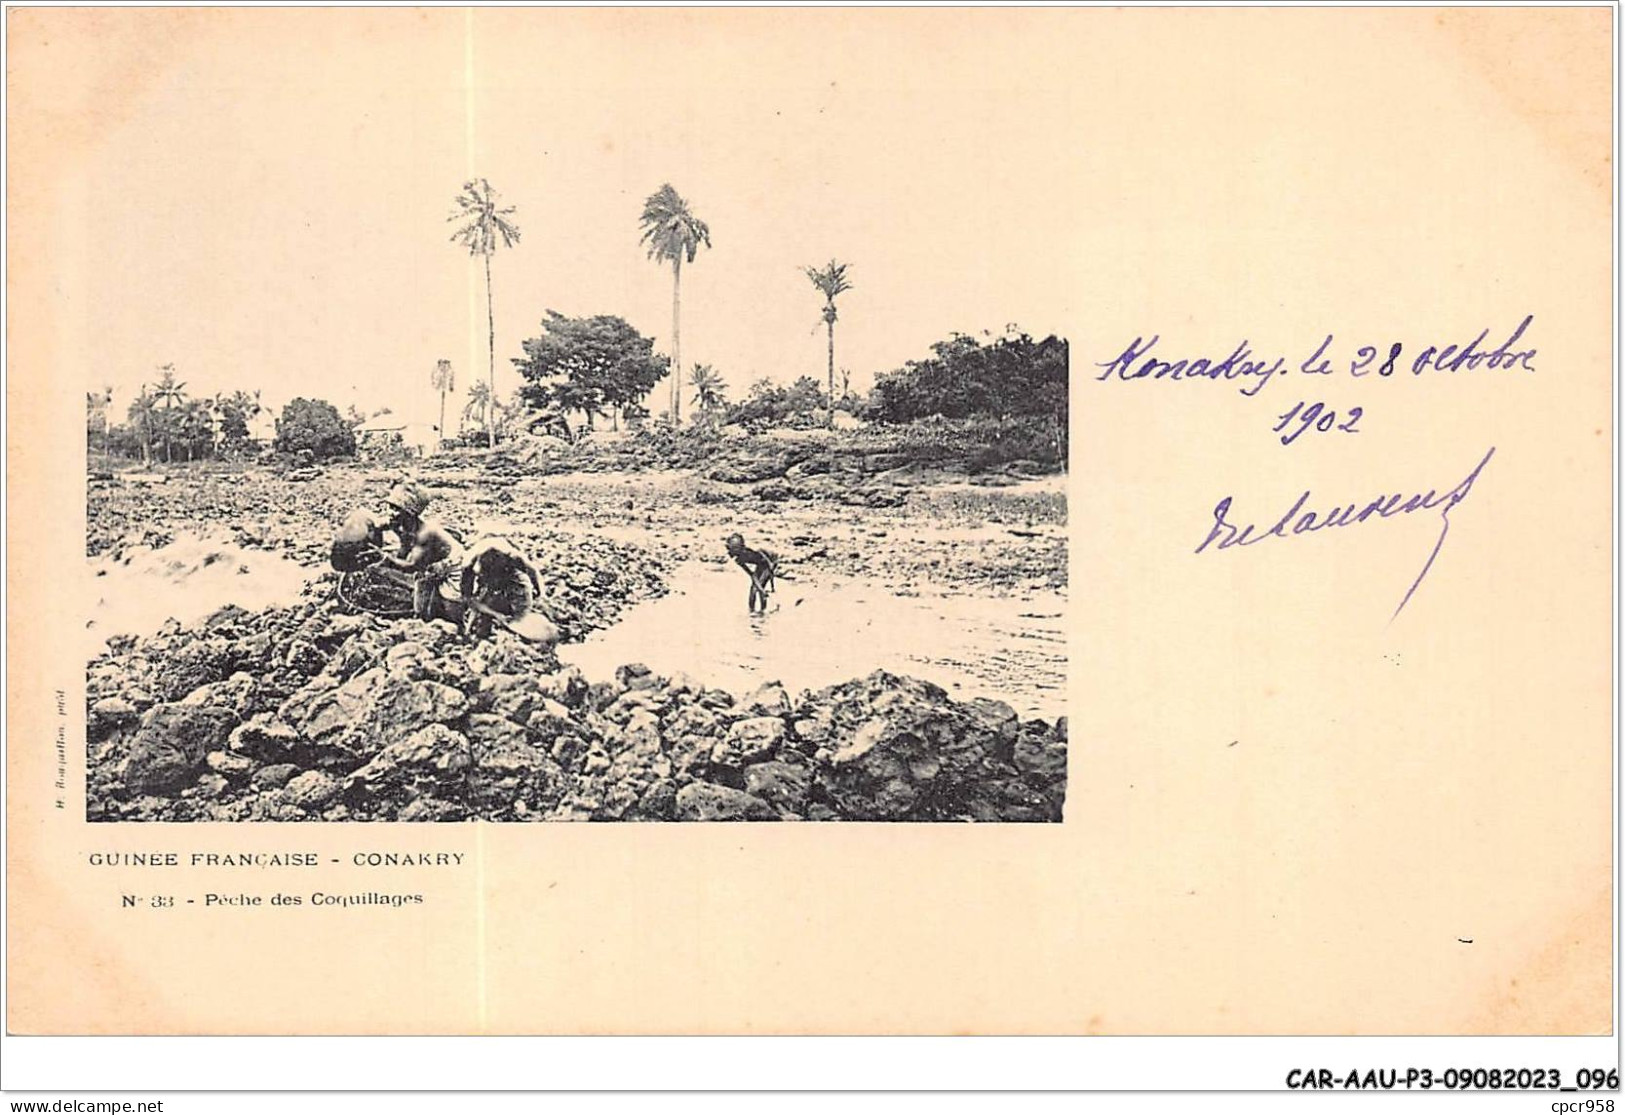 CAR-AAUP3-0195 - GUINEE - GUINEE FRANCAISE - CONAKRY - Peche Des Coquillages - Französisch-Guinea